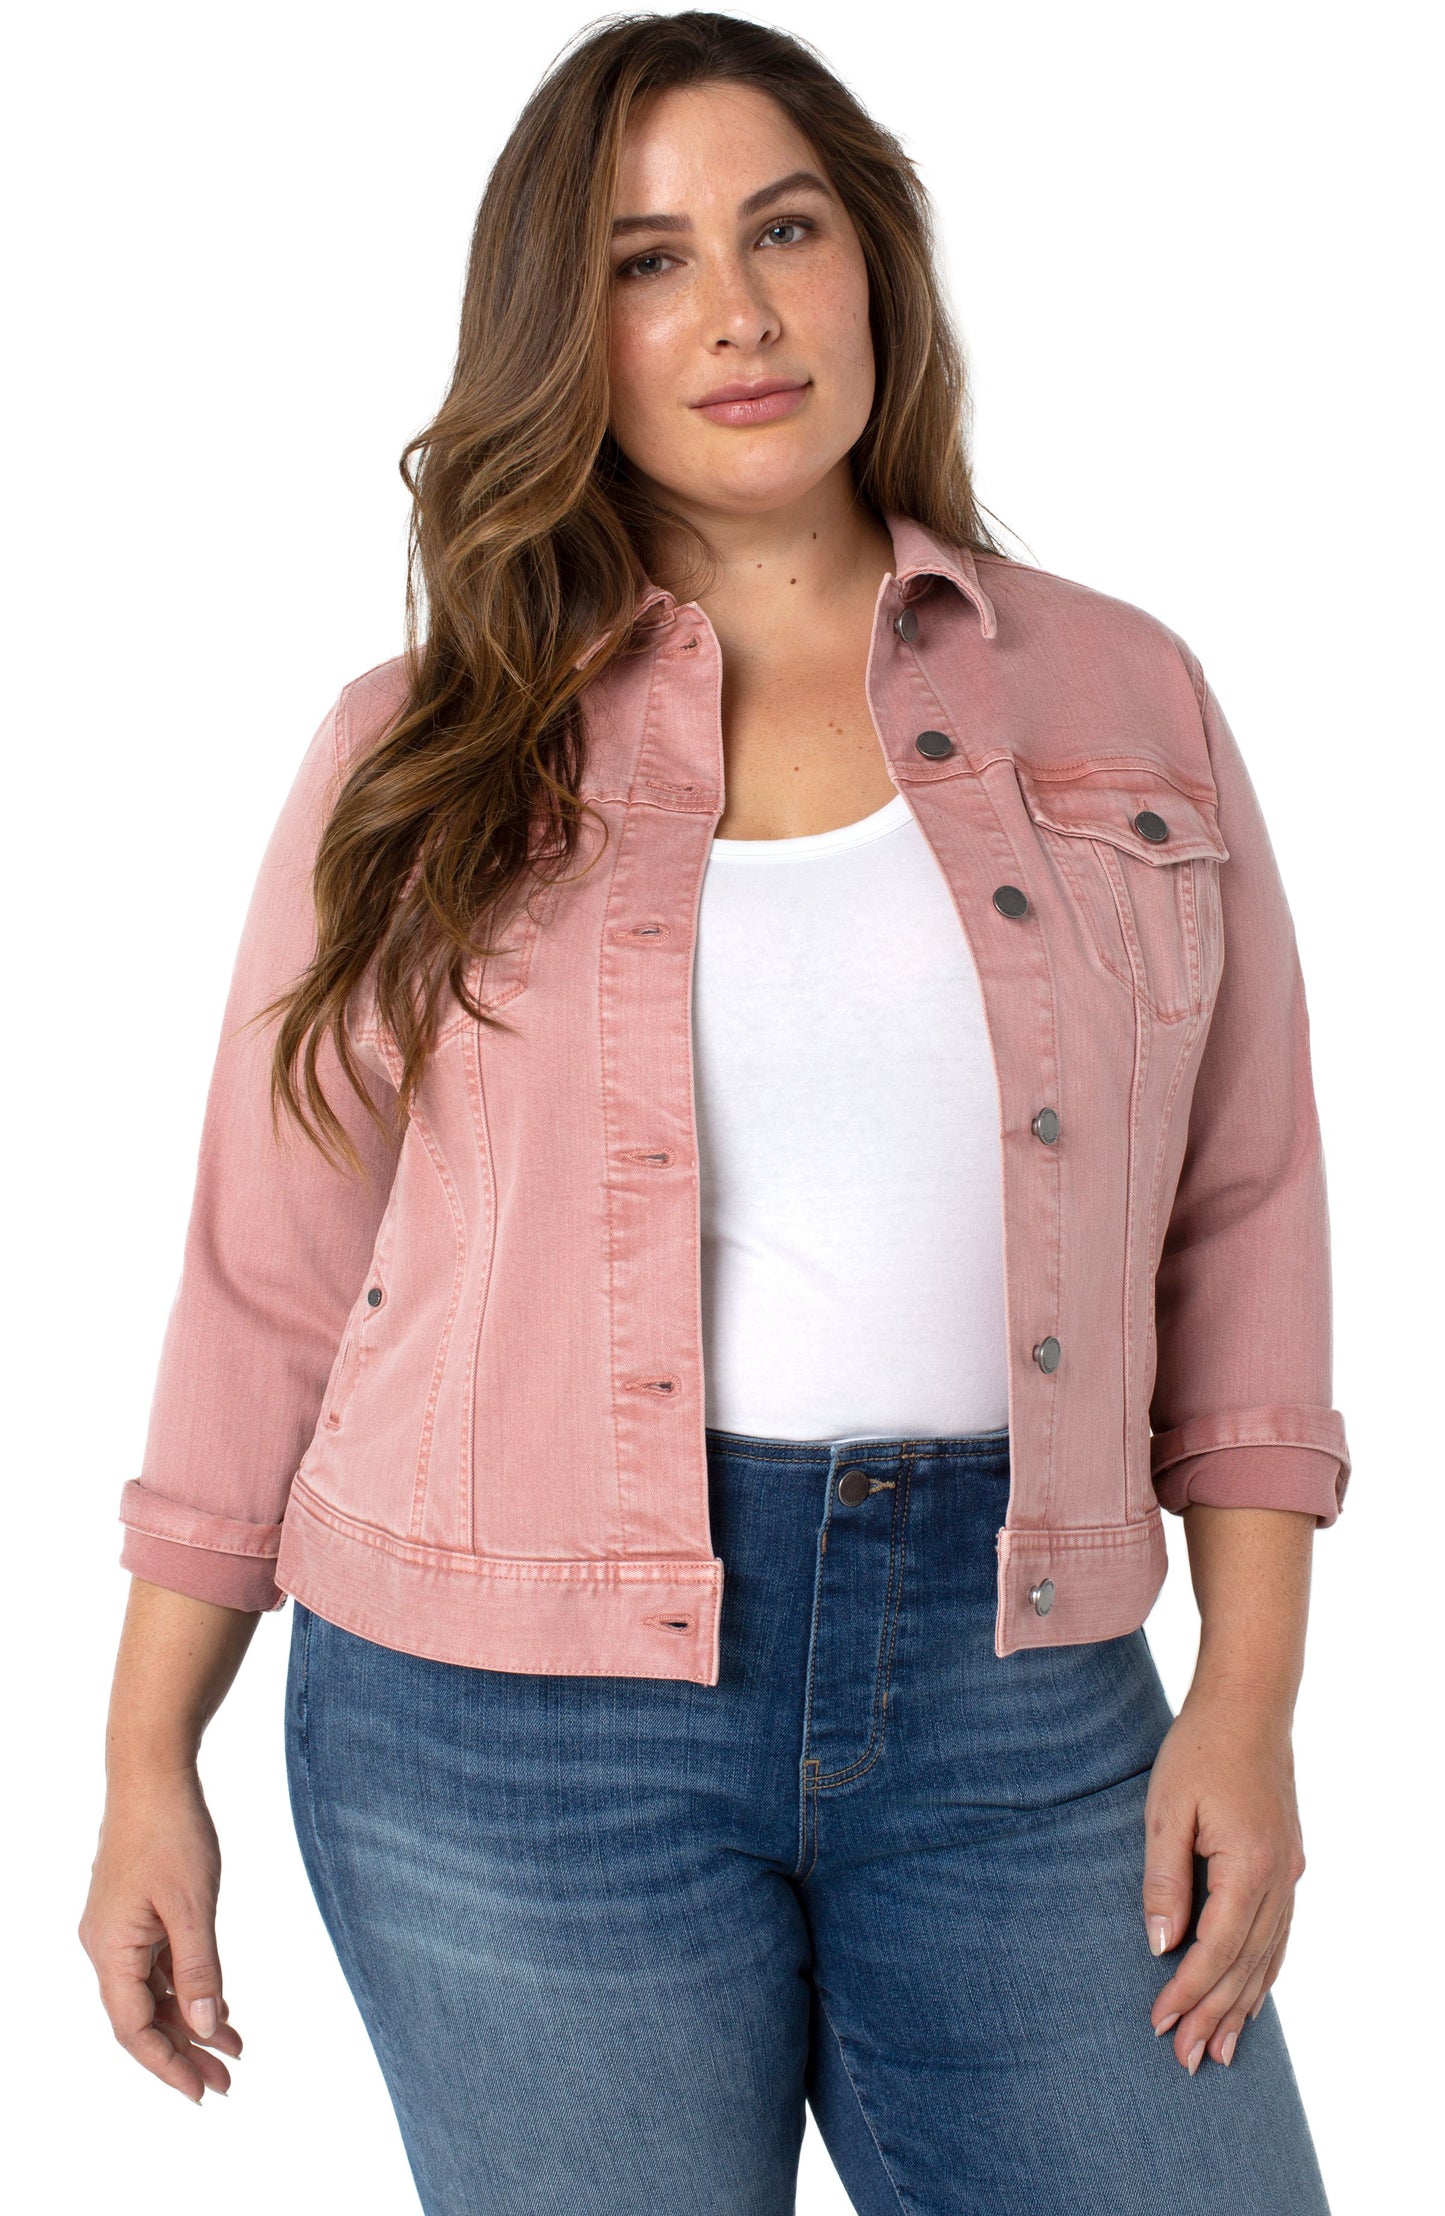 Liverpool Classic Jean Jacket (variety of colors)